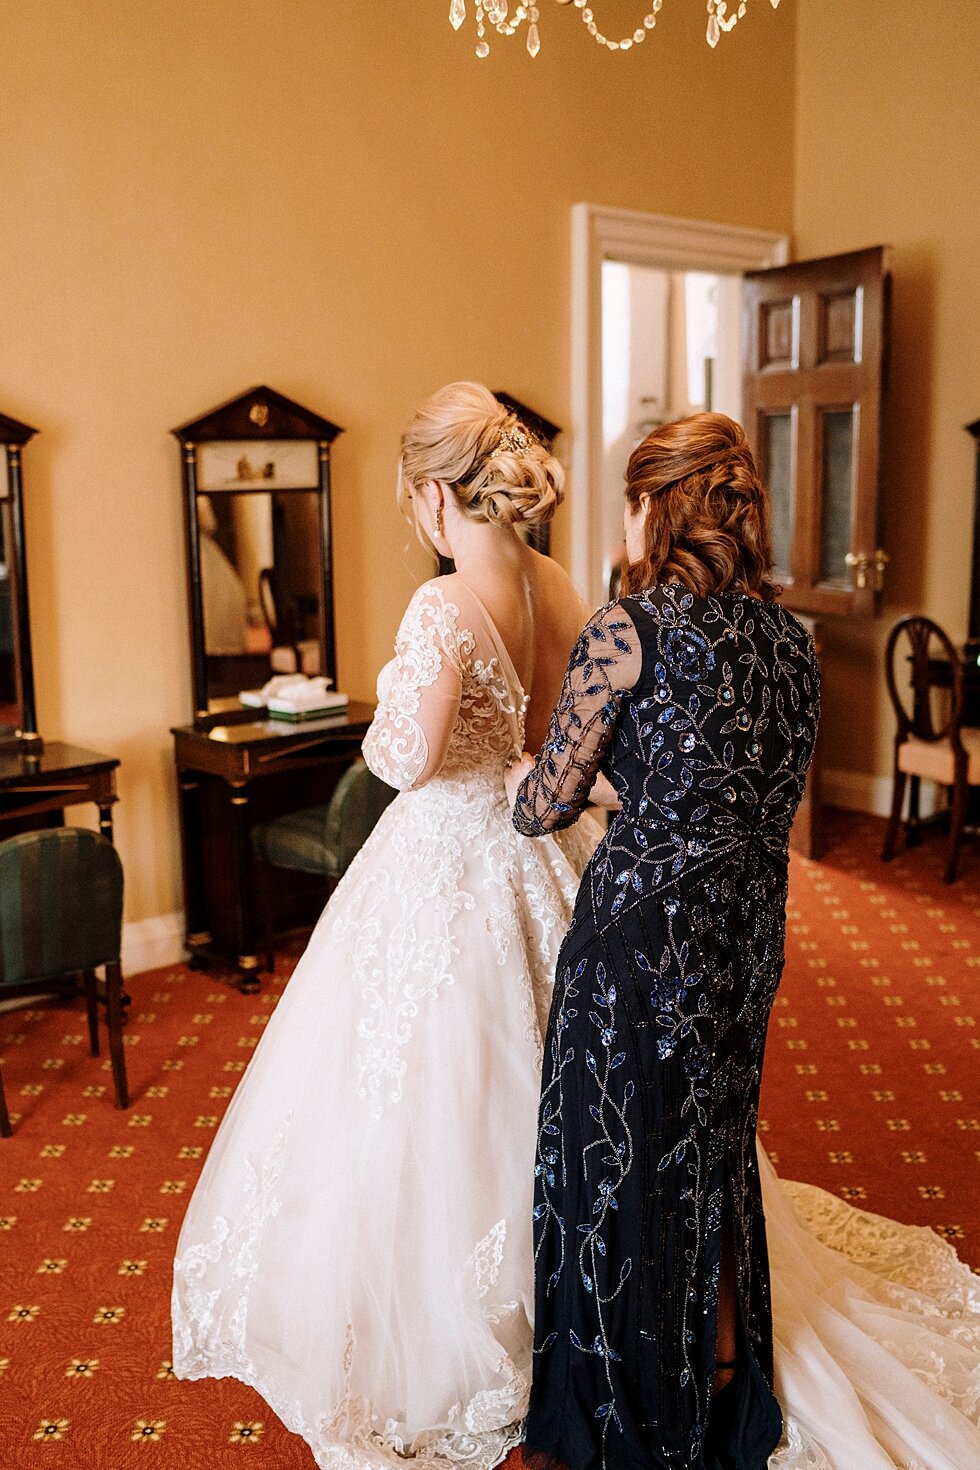  The mother of the bride put the finishing touches on the bride as they finished getting ready in the Bride’s room just before the wedding began. Brisk February winter wedding Pendennis Club Louisville, Kentucky southern wedding bride and groom caref